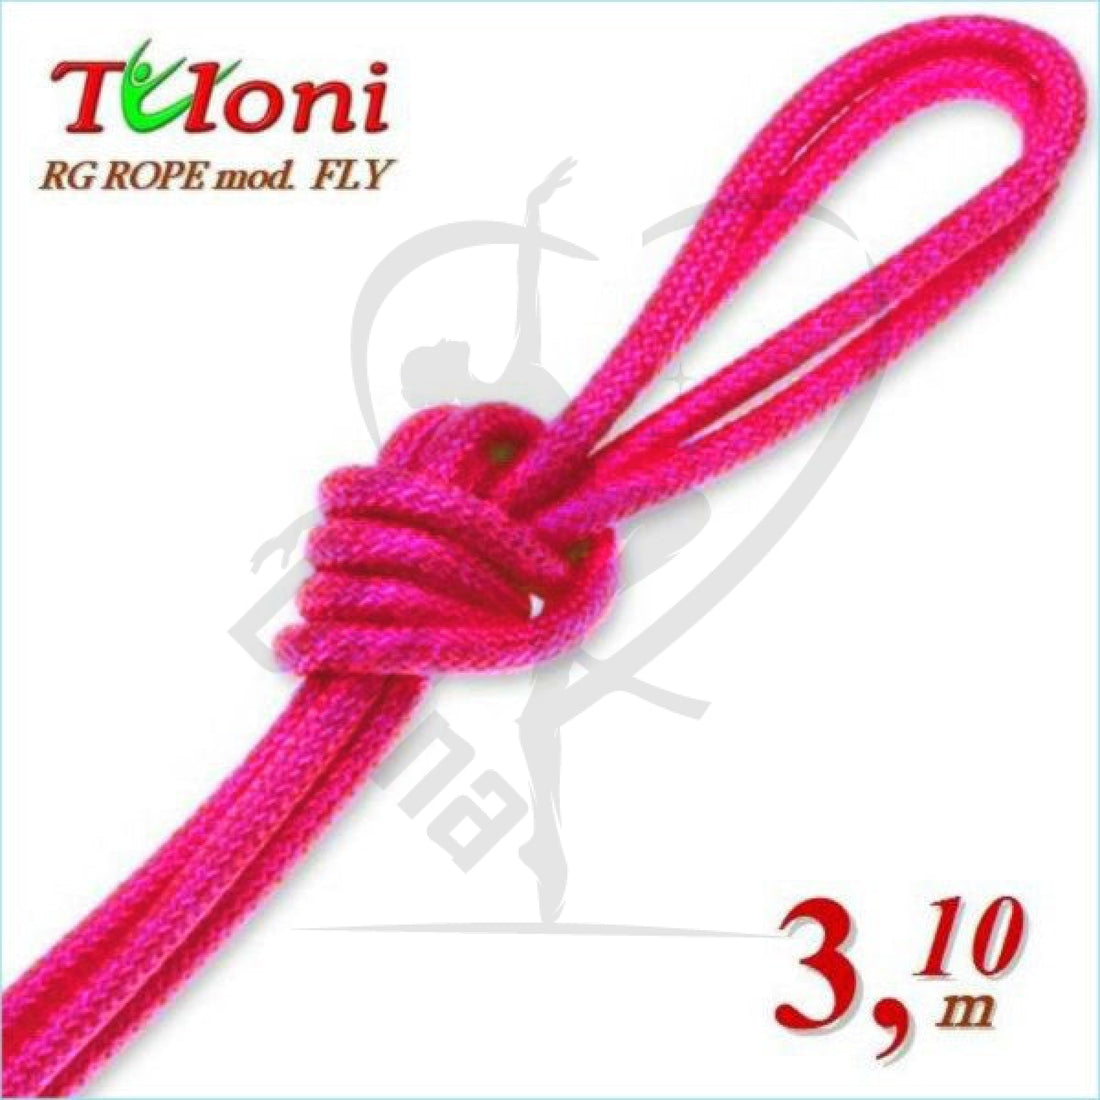 Tuloni Competition Rope For Seniors Mod. Fly 3.1M Pink Ropes